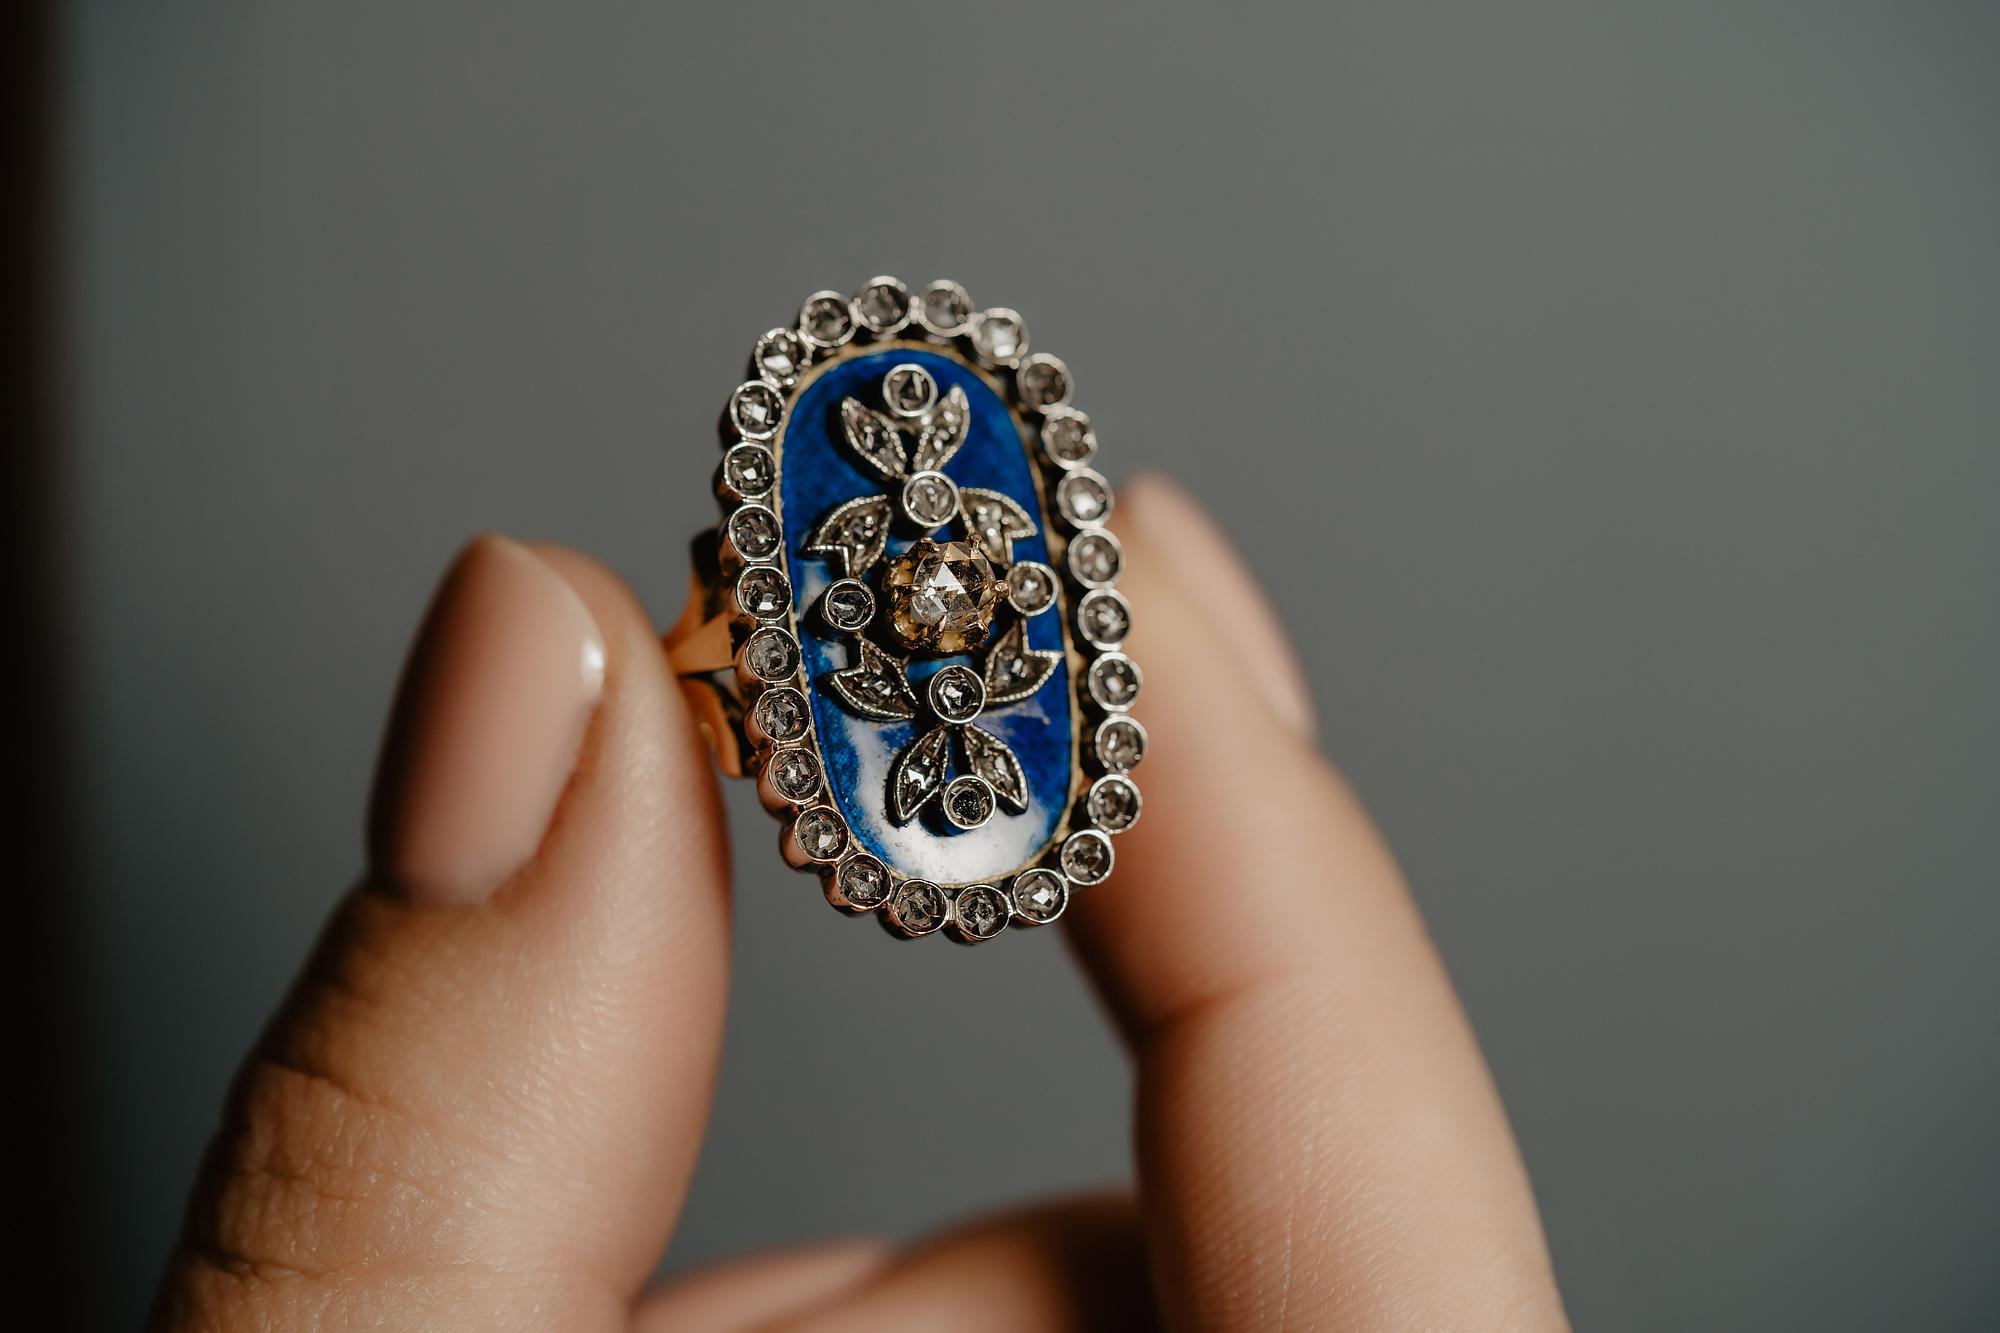 A unique vintage revival of Georgian era 'Ring of the Sky' - 'Bague de firmament'. Made of solid 14ct gold, British. Dating back to the mid-1700's and set with magnificent midnight-blue enamel. The rings centerpiece is accented with five very clear